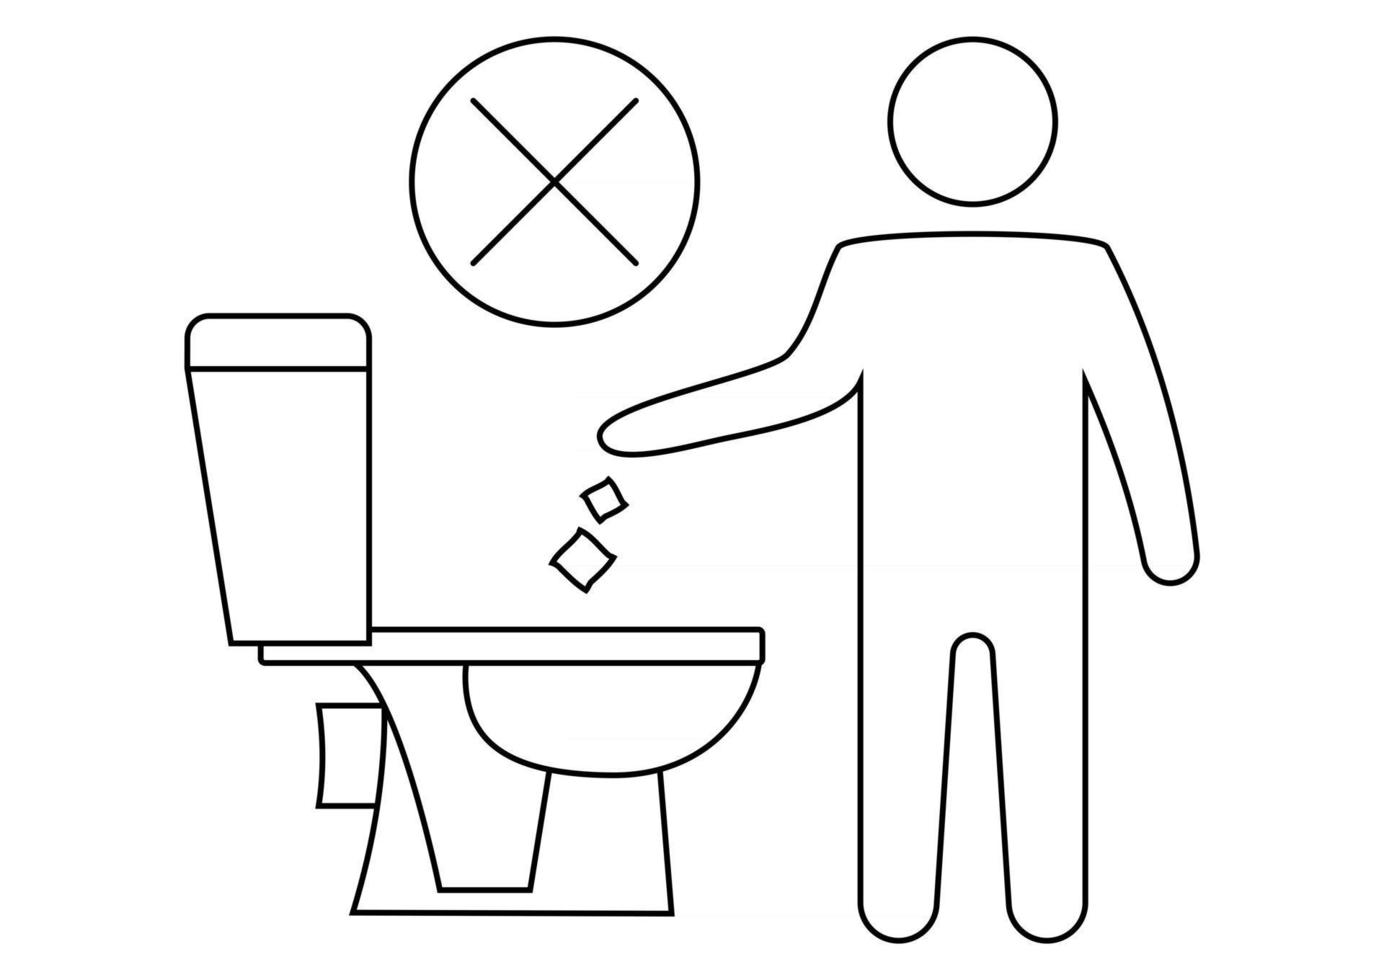 Do not litter in the toilet. Keeping the clean, sign. The silhouette of a man, throw garbage in a toilet. Forbidden icon. No littering, warning symbol. Public Information. Editable stroke vector